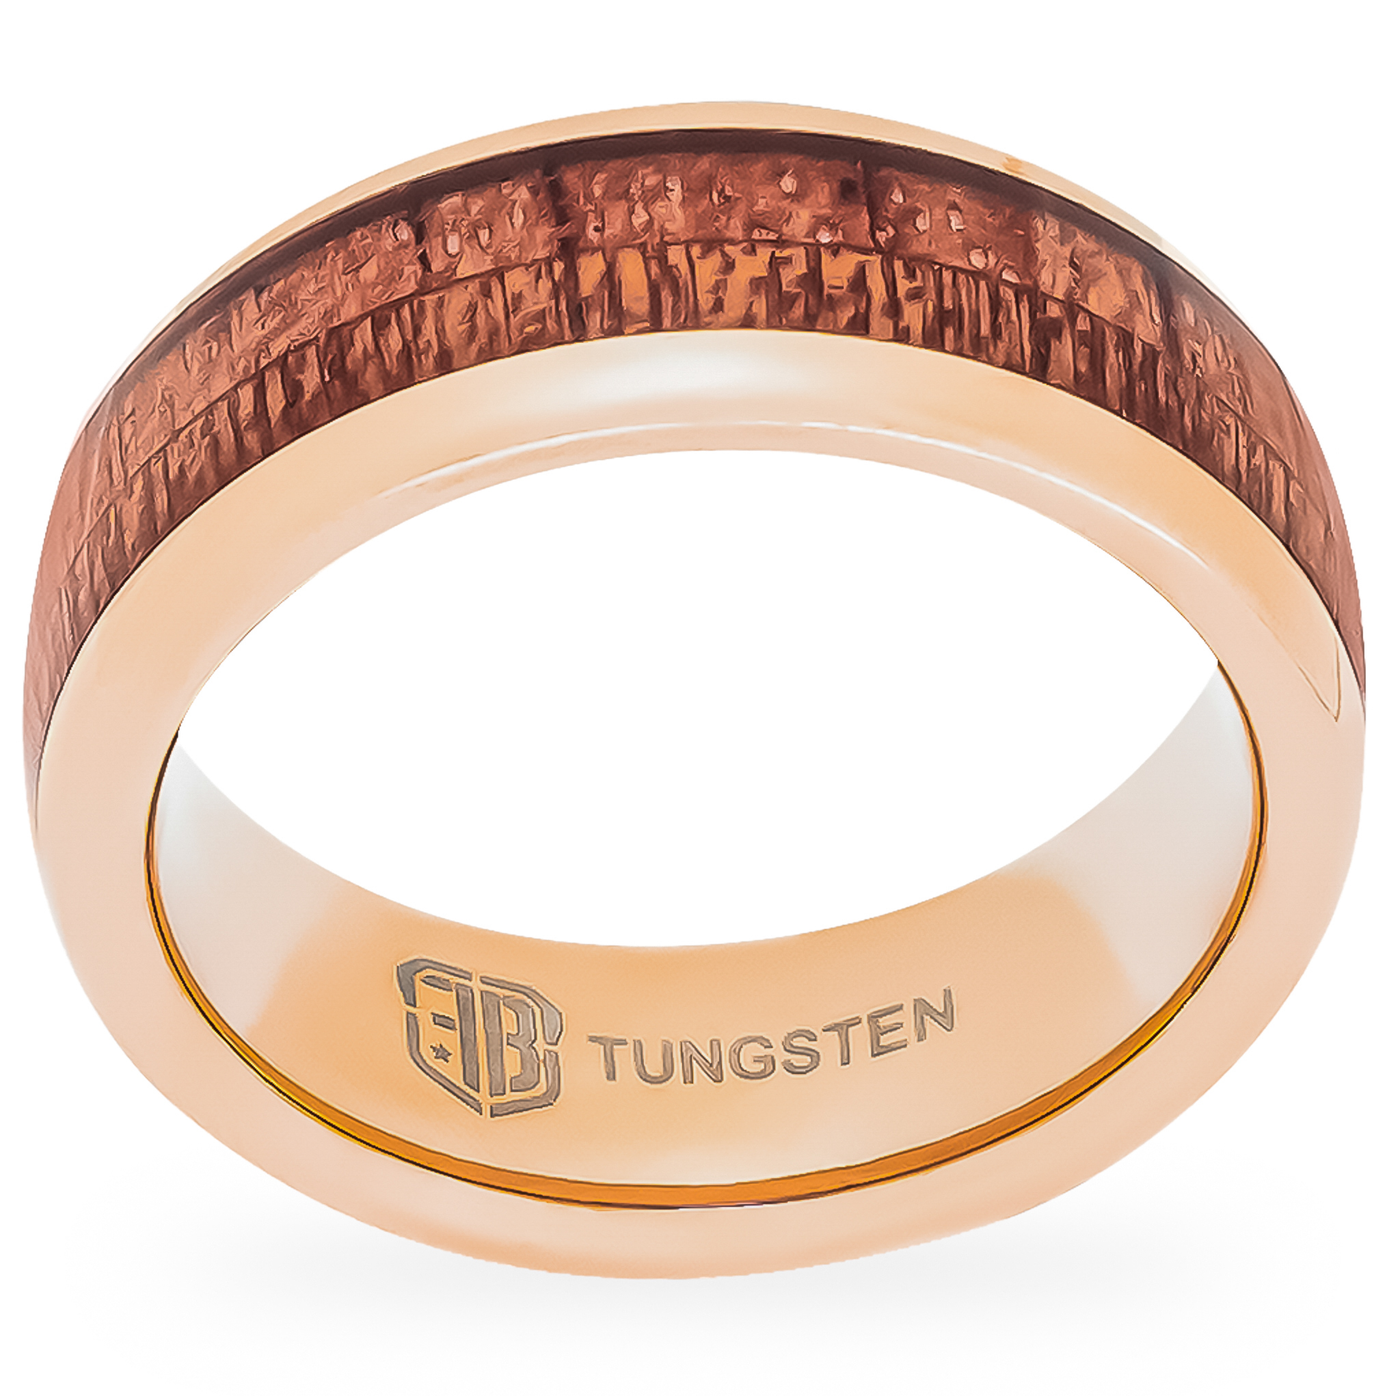 Wood inlaid wedding band for men